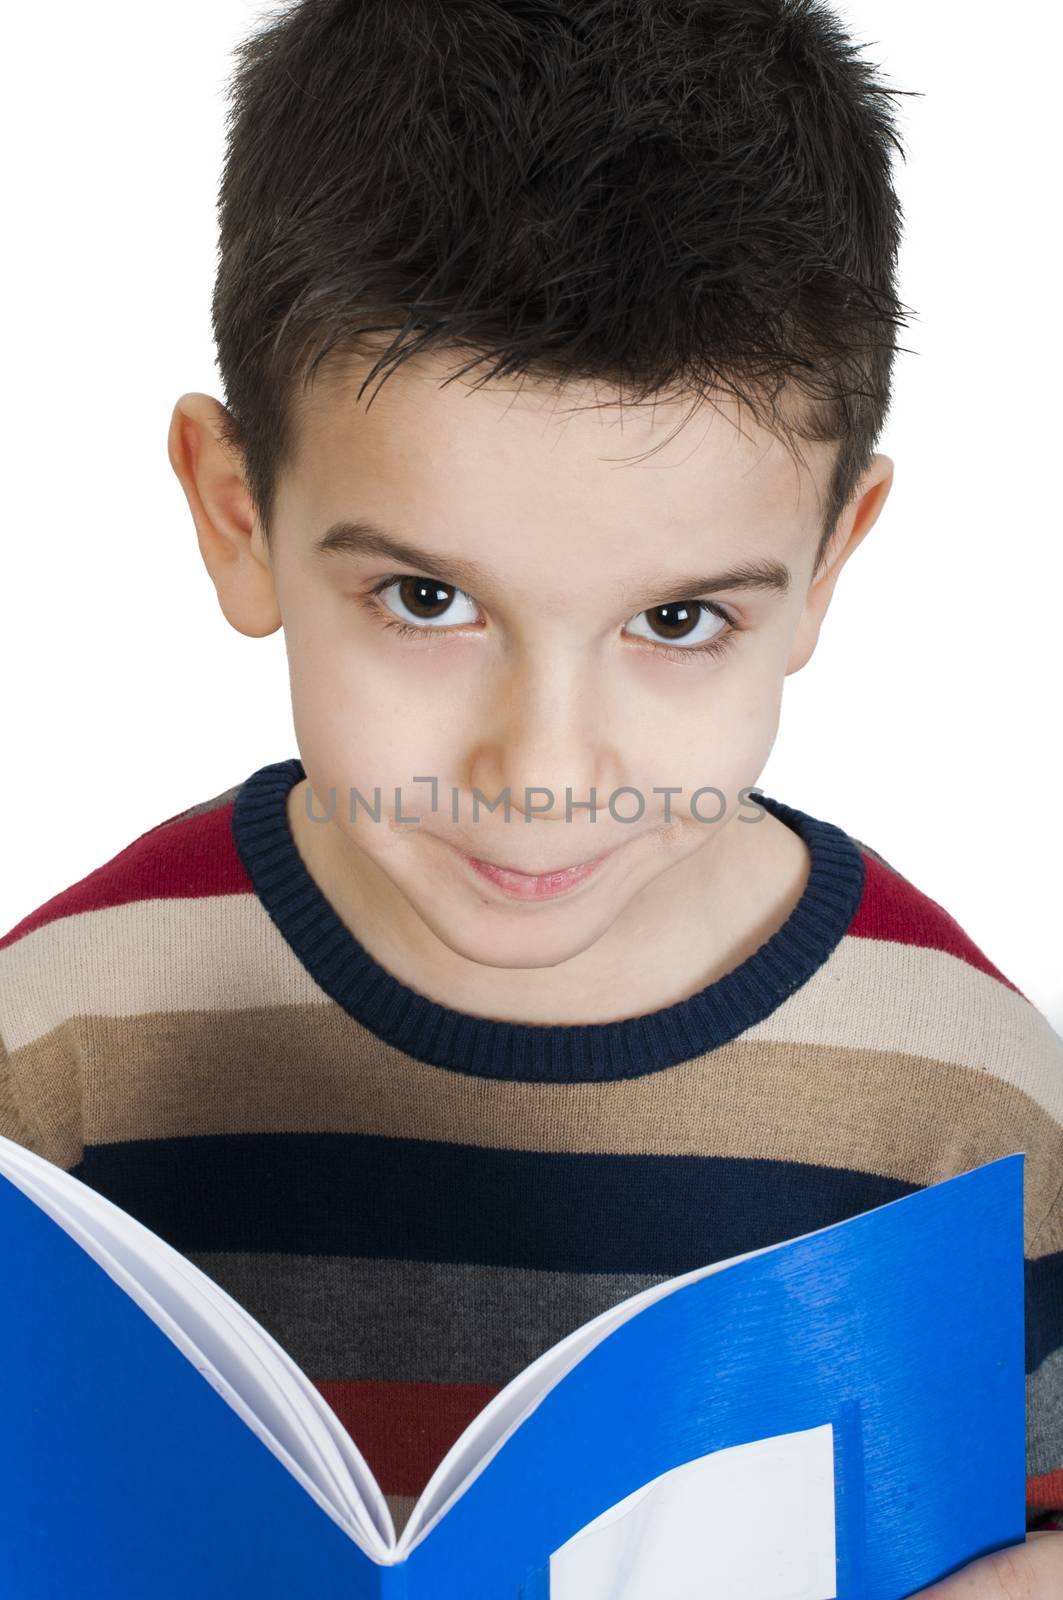 Child with notebook in front of the face by deyan_georgiev